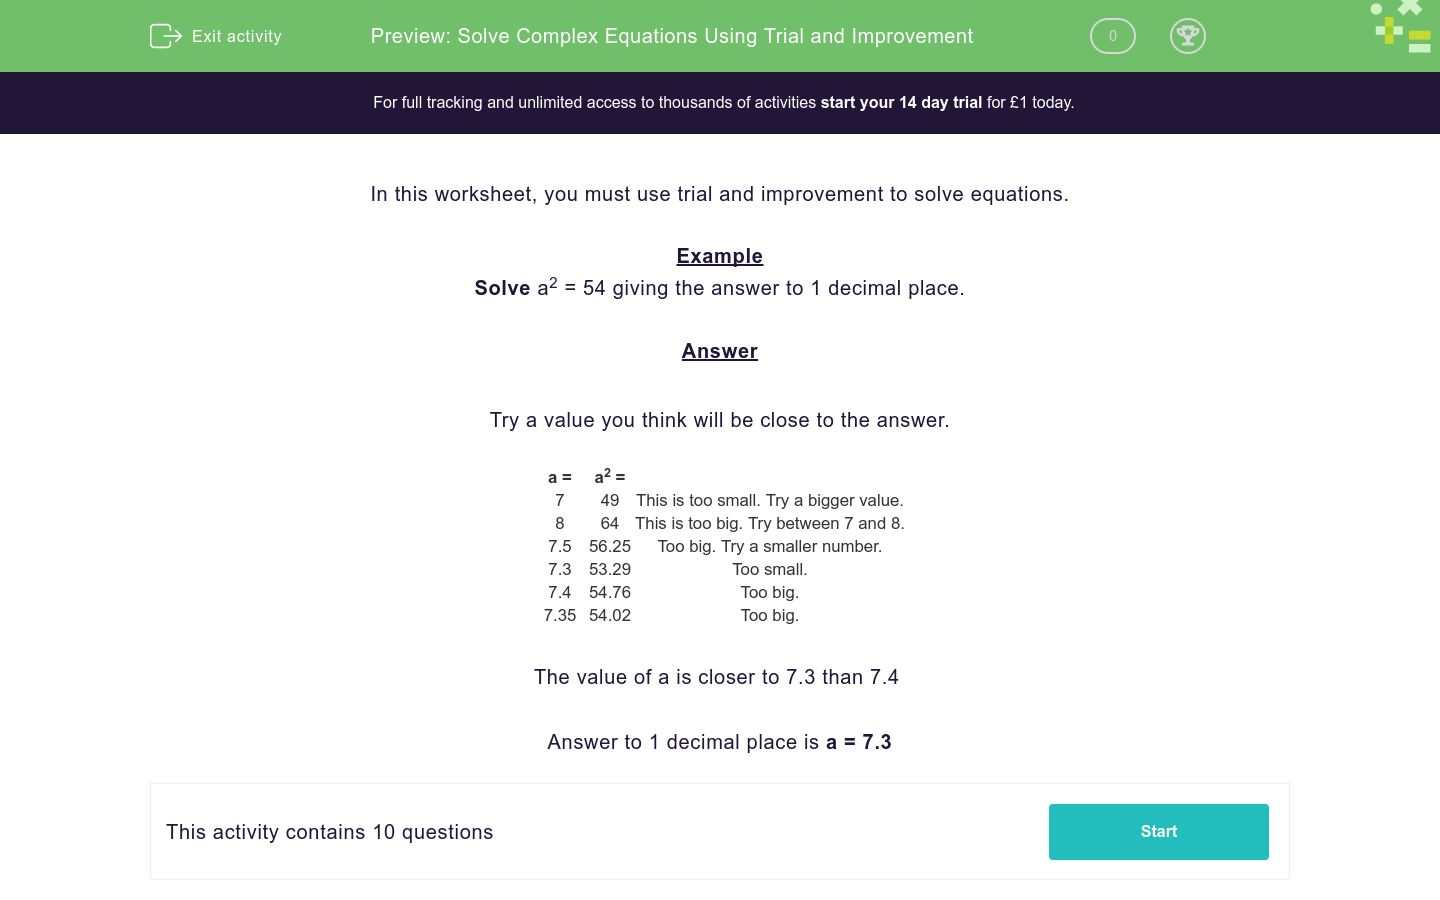 Solve Complex Equations Using Trial and Improvement Worksheet - EdPlace